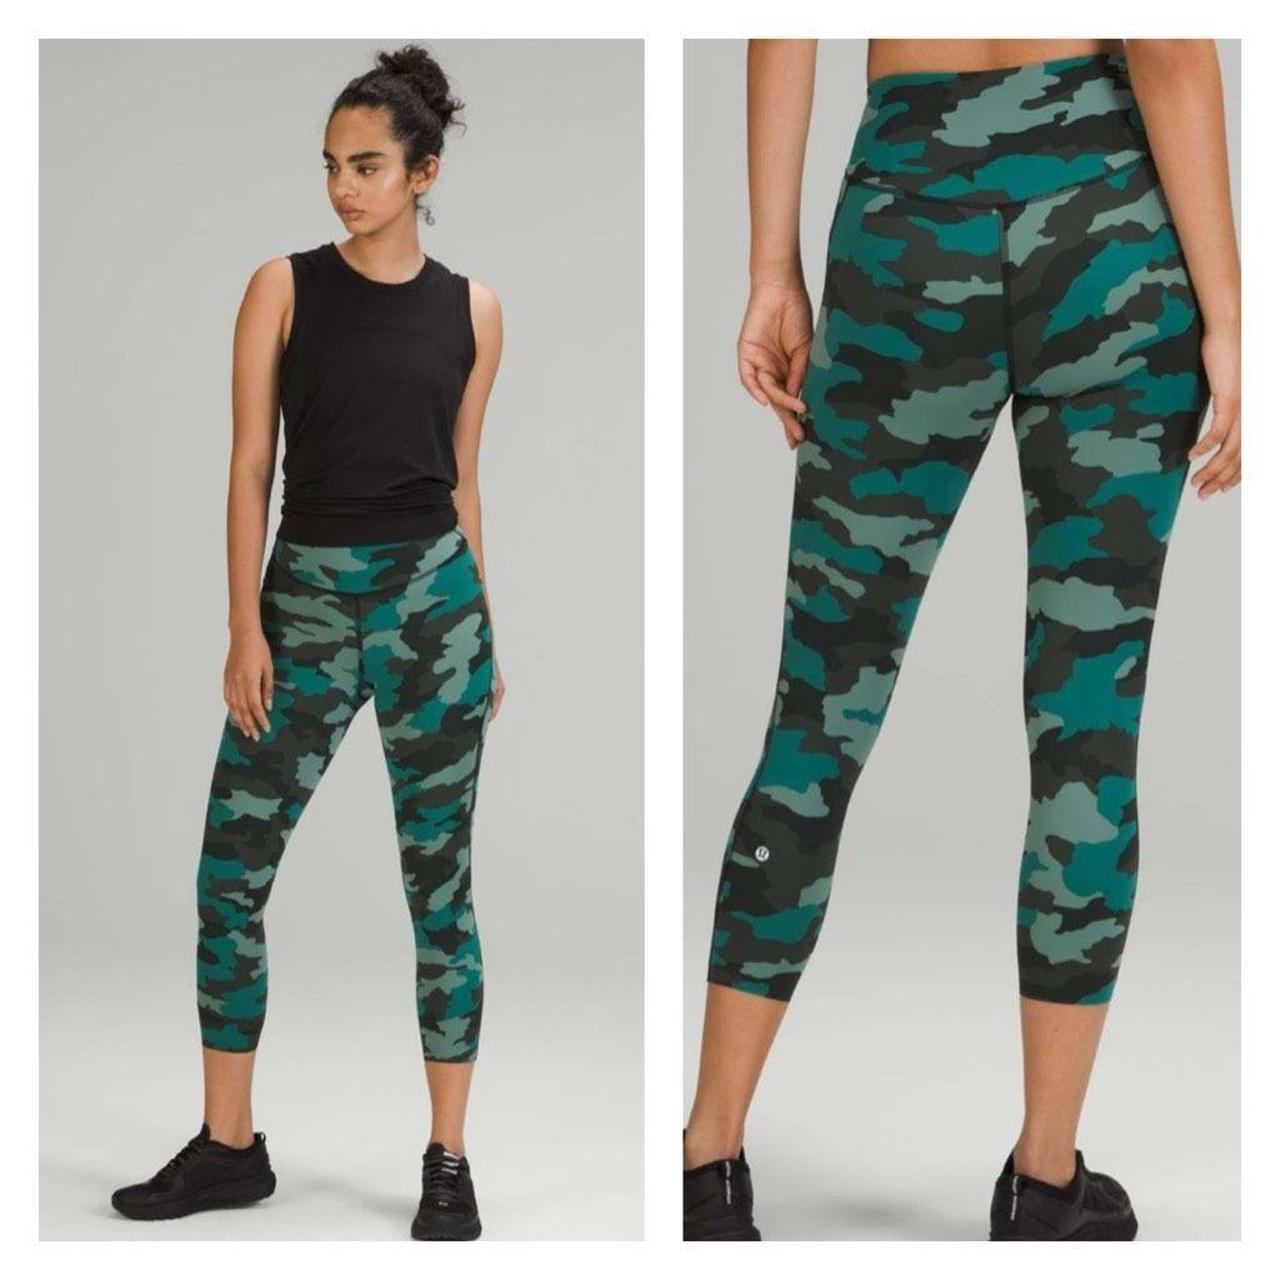 Lululemon Train Times Crop 17 Nocturnal Teal Luxtreme 4